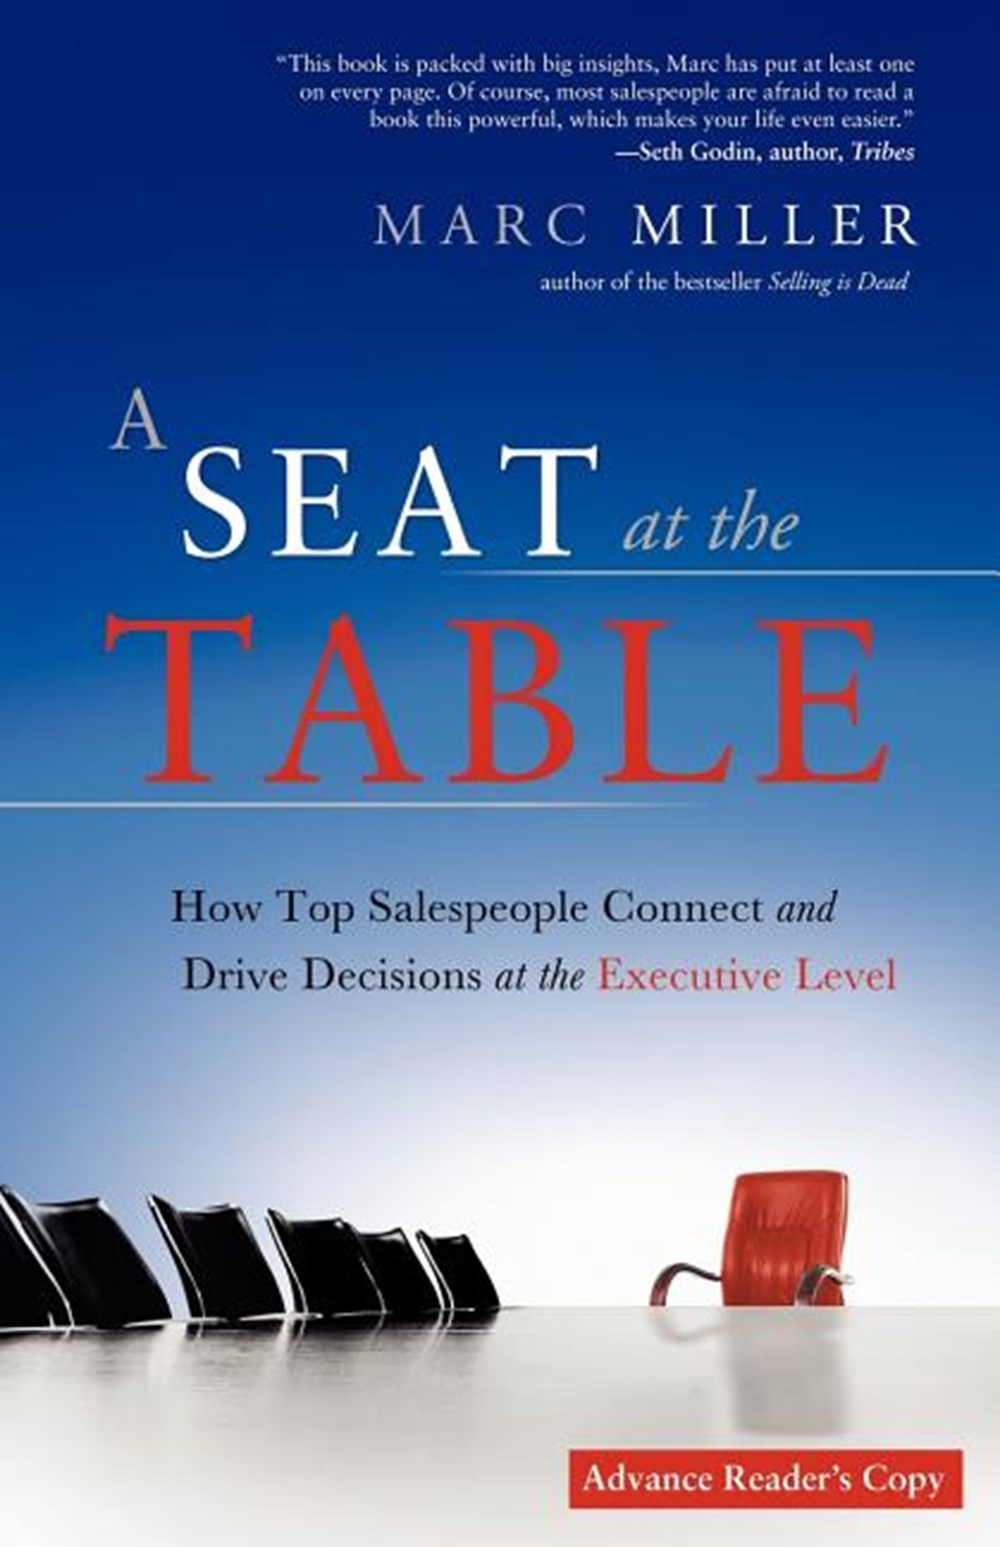 Seat at the Table: How Top Salespeople Connect and Drive Decisions at the Executive Level